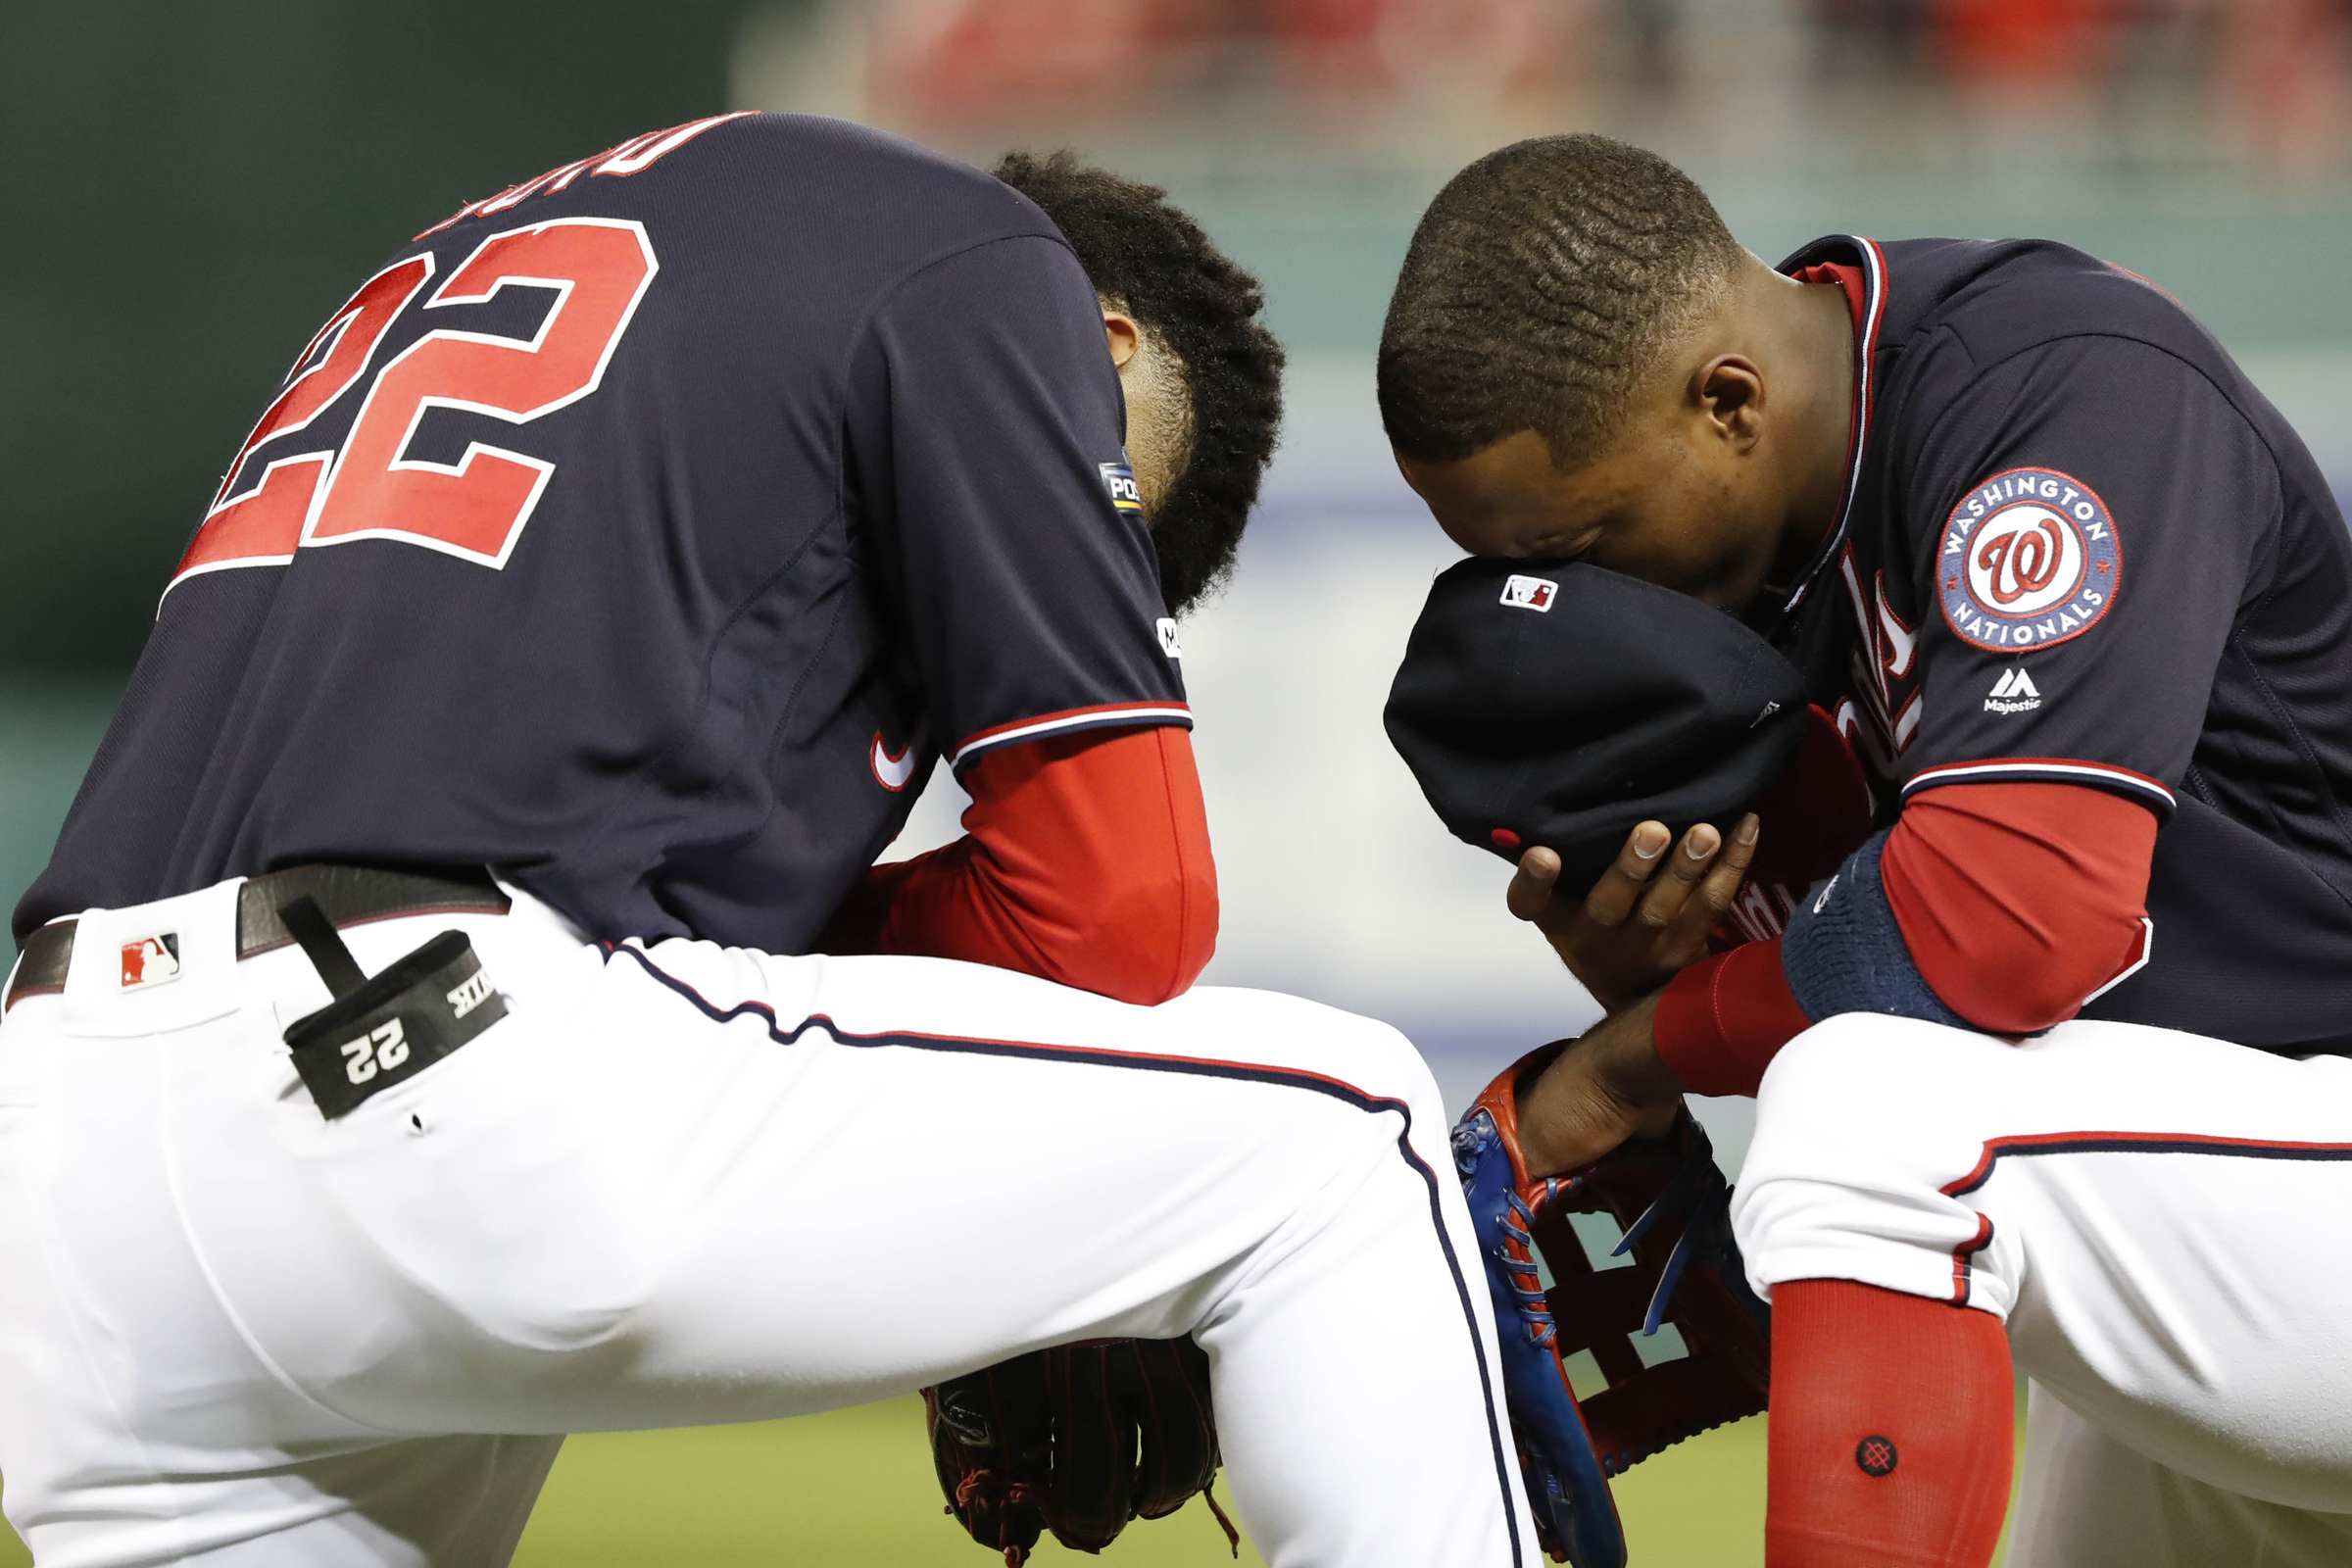 Lessons from the World Series Champion Washington Nationals